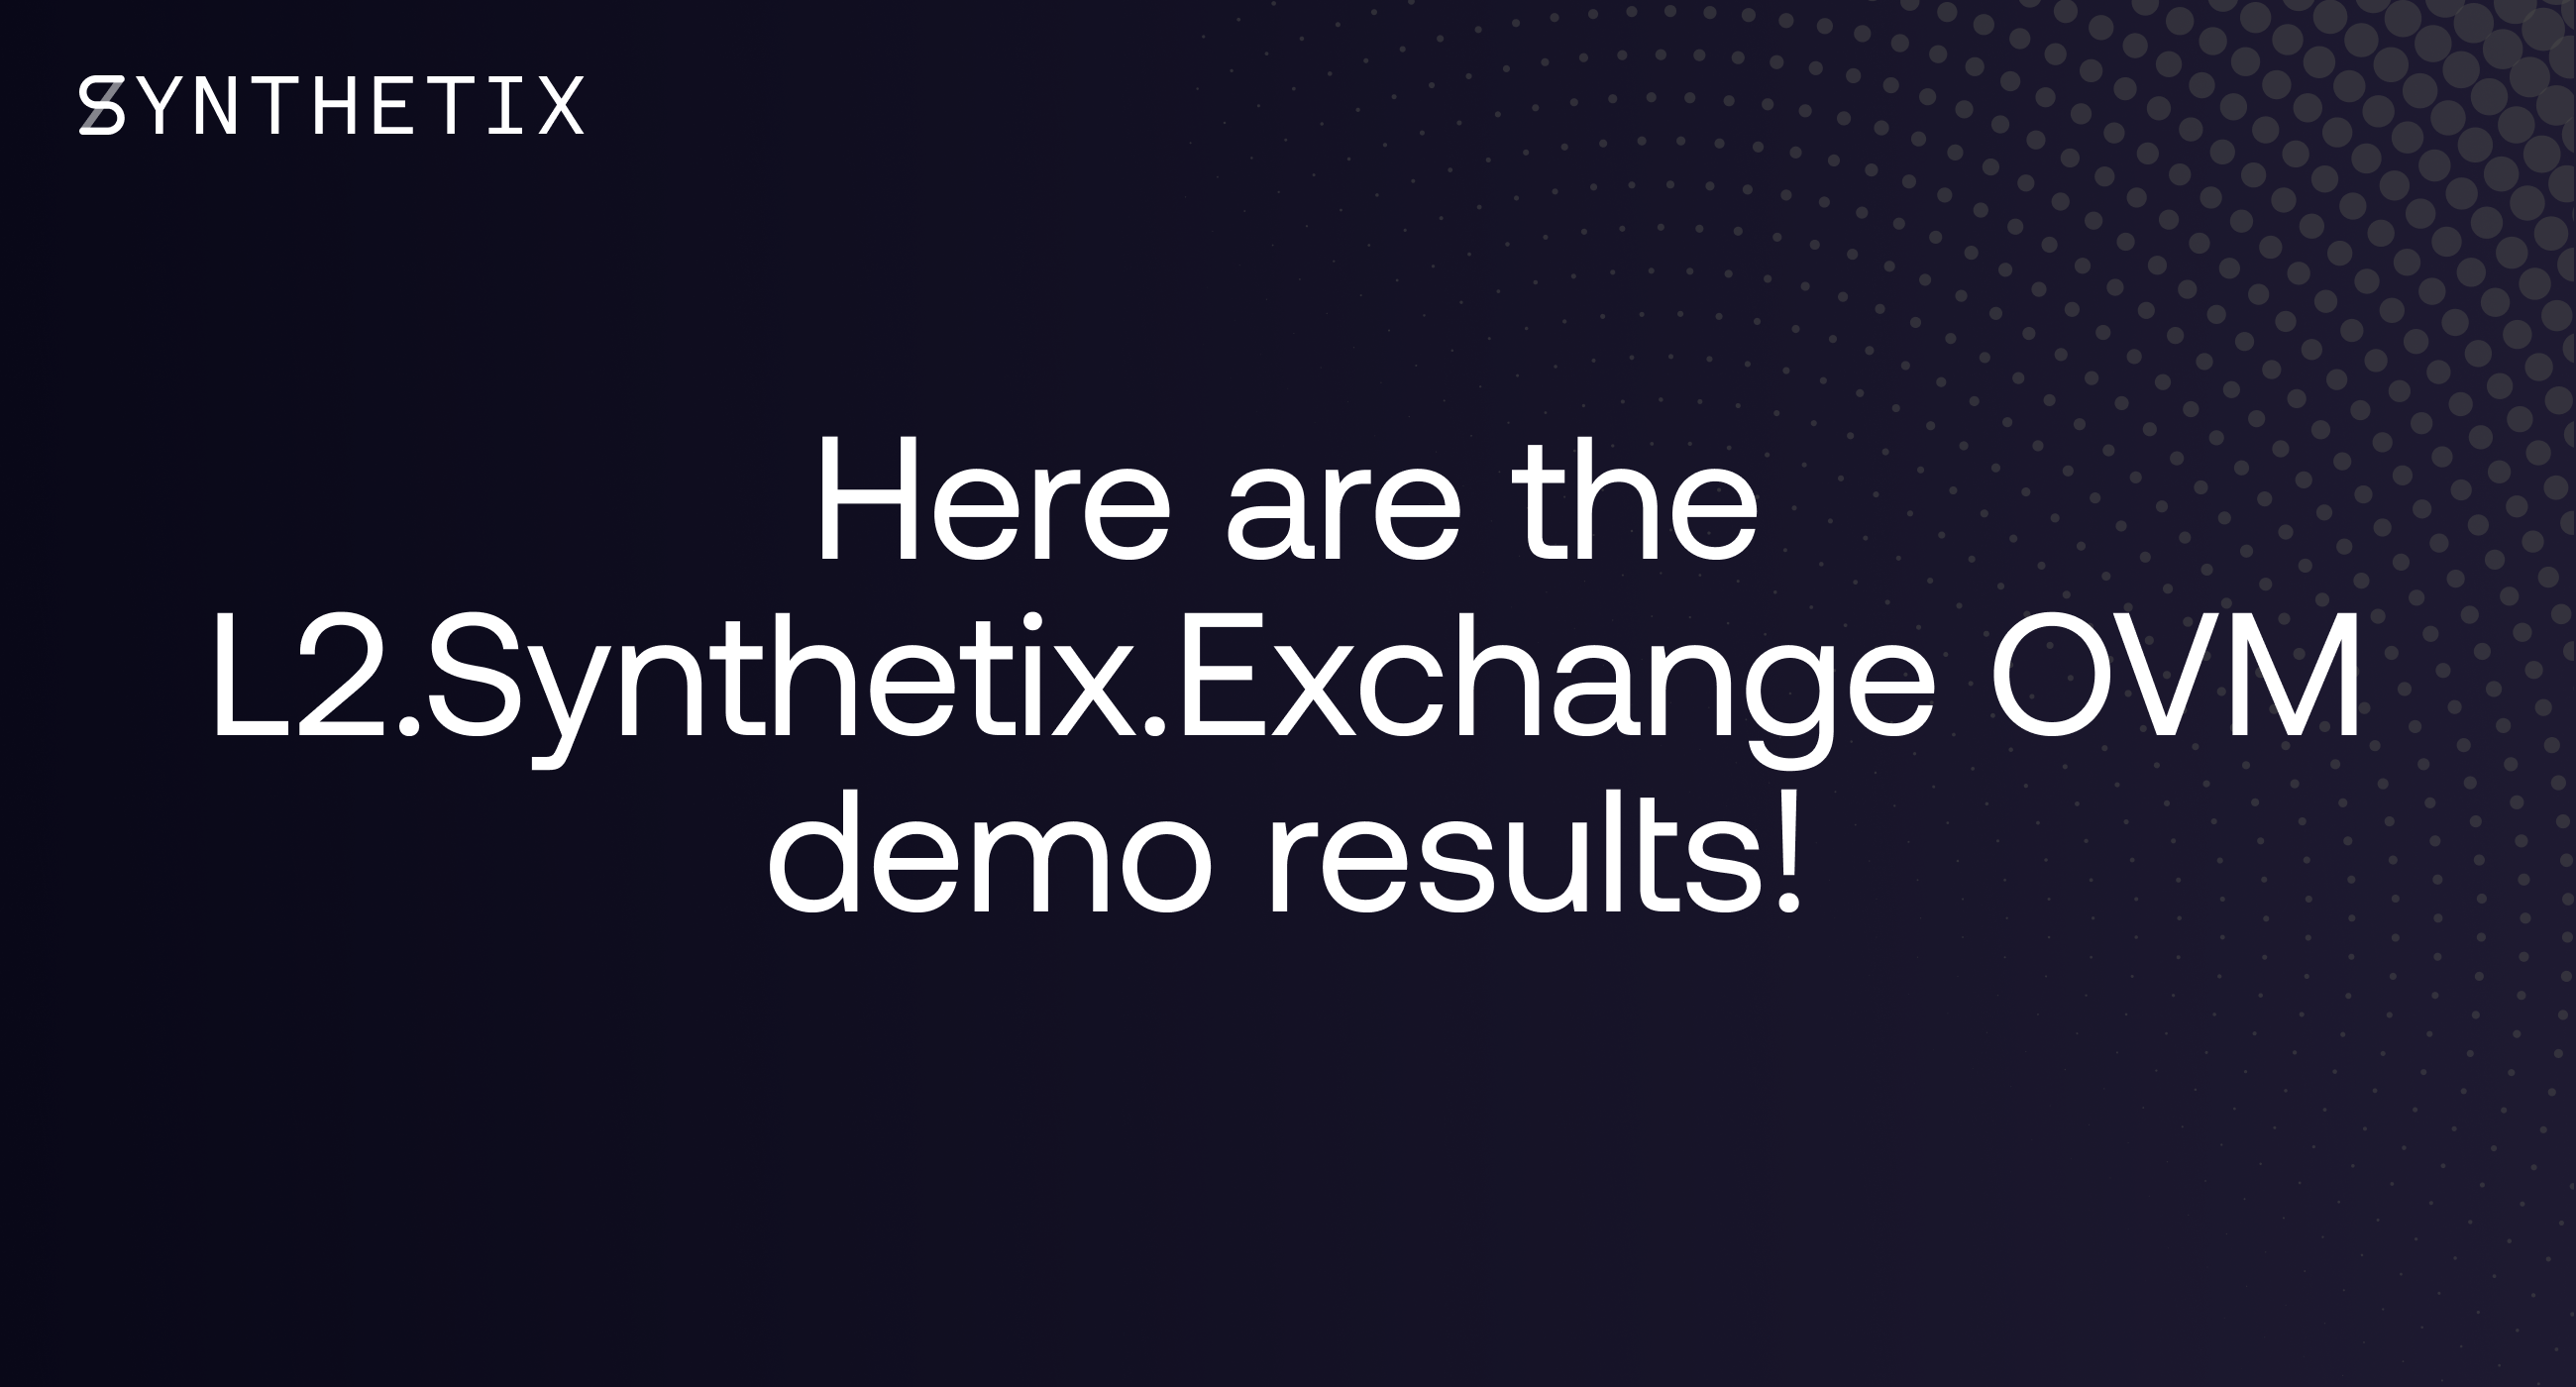 L2.Synthetix.Exchange OVM demo results